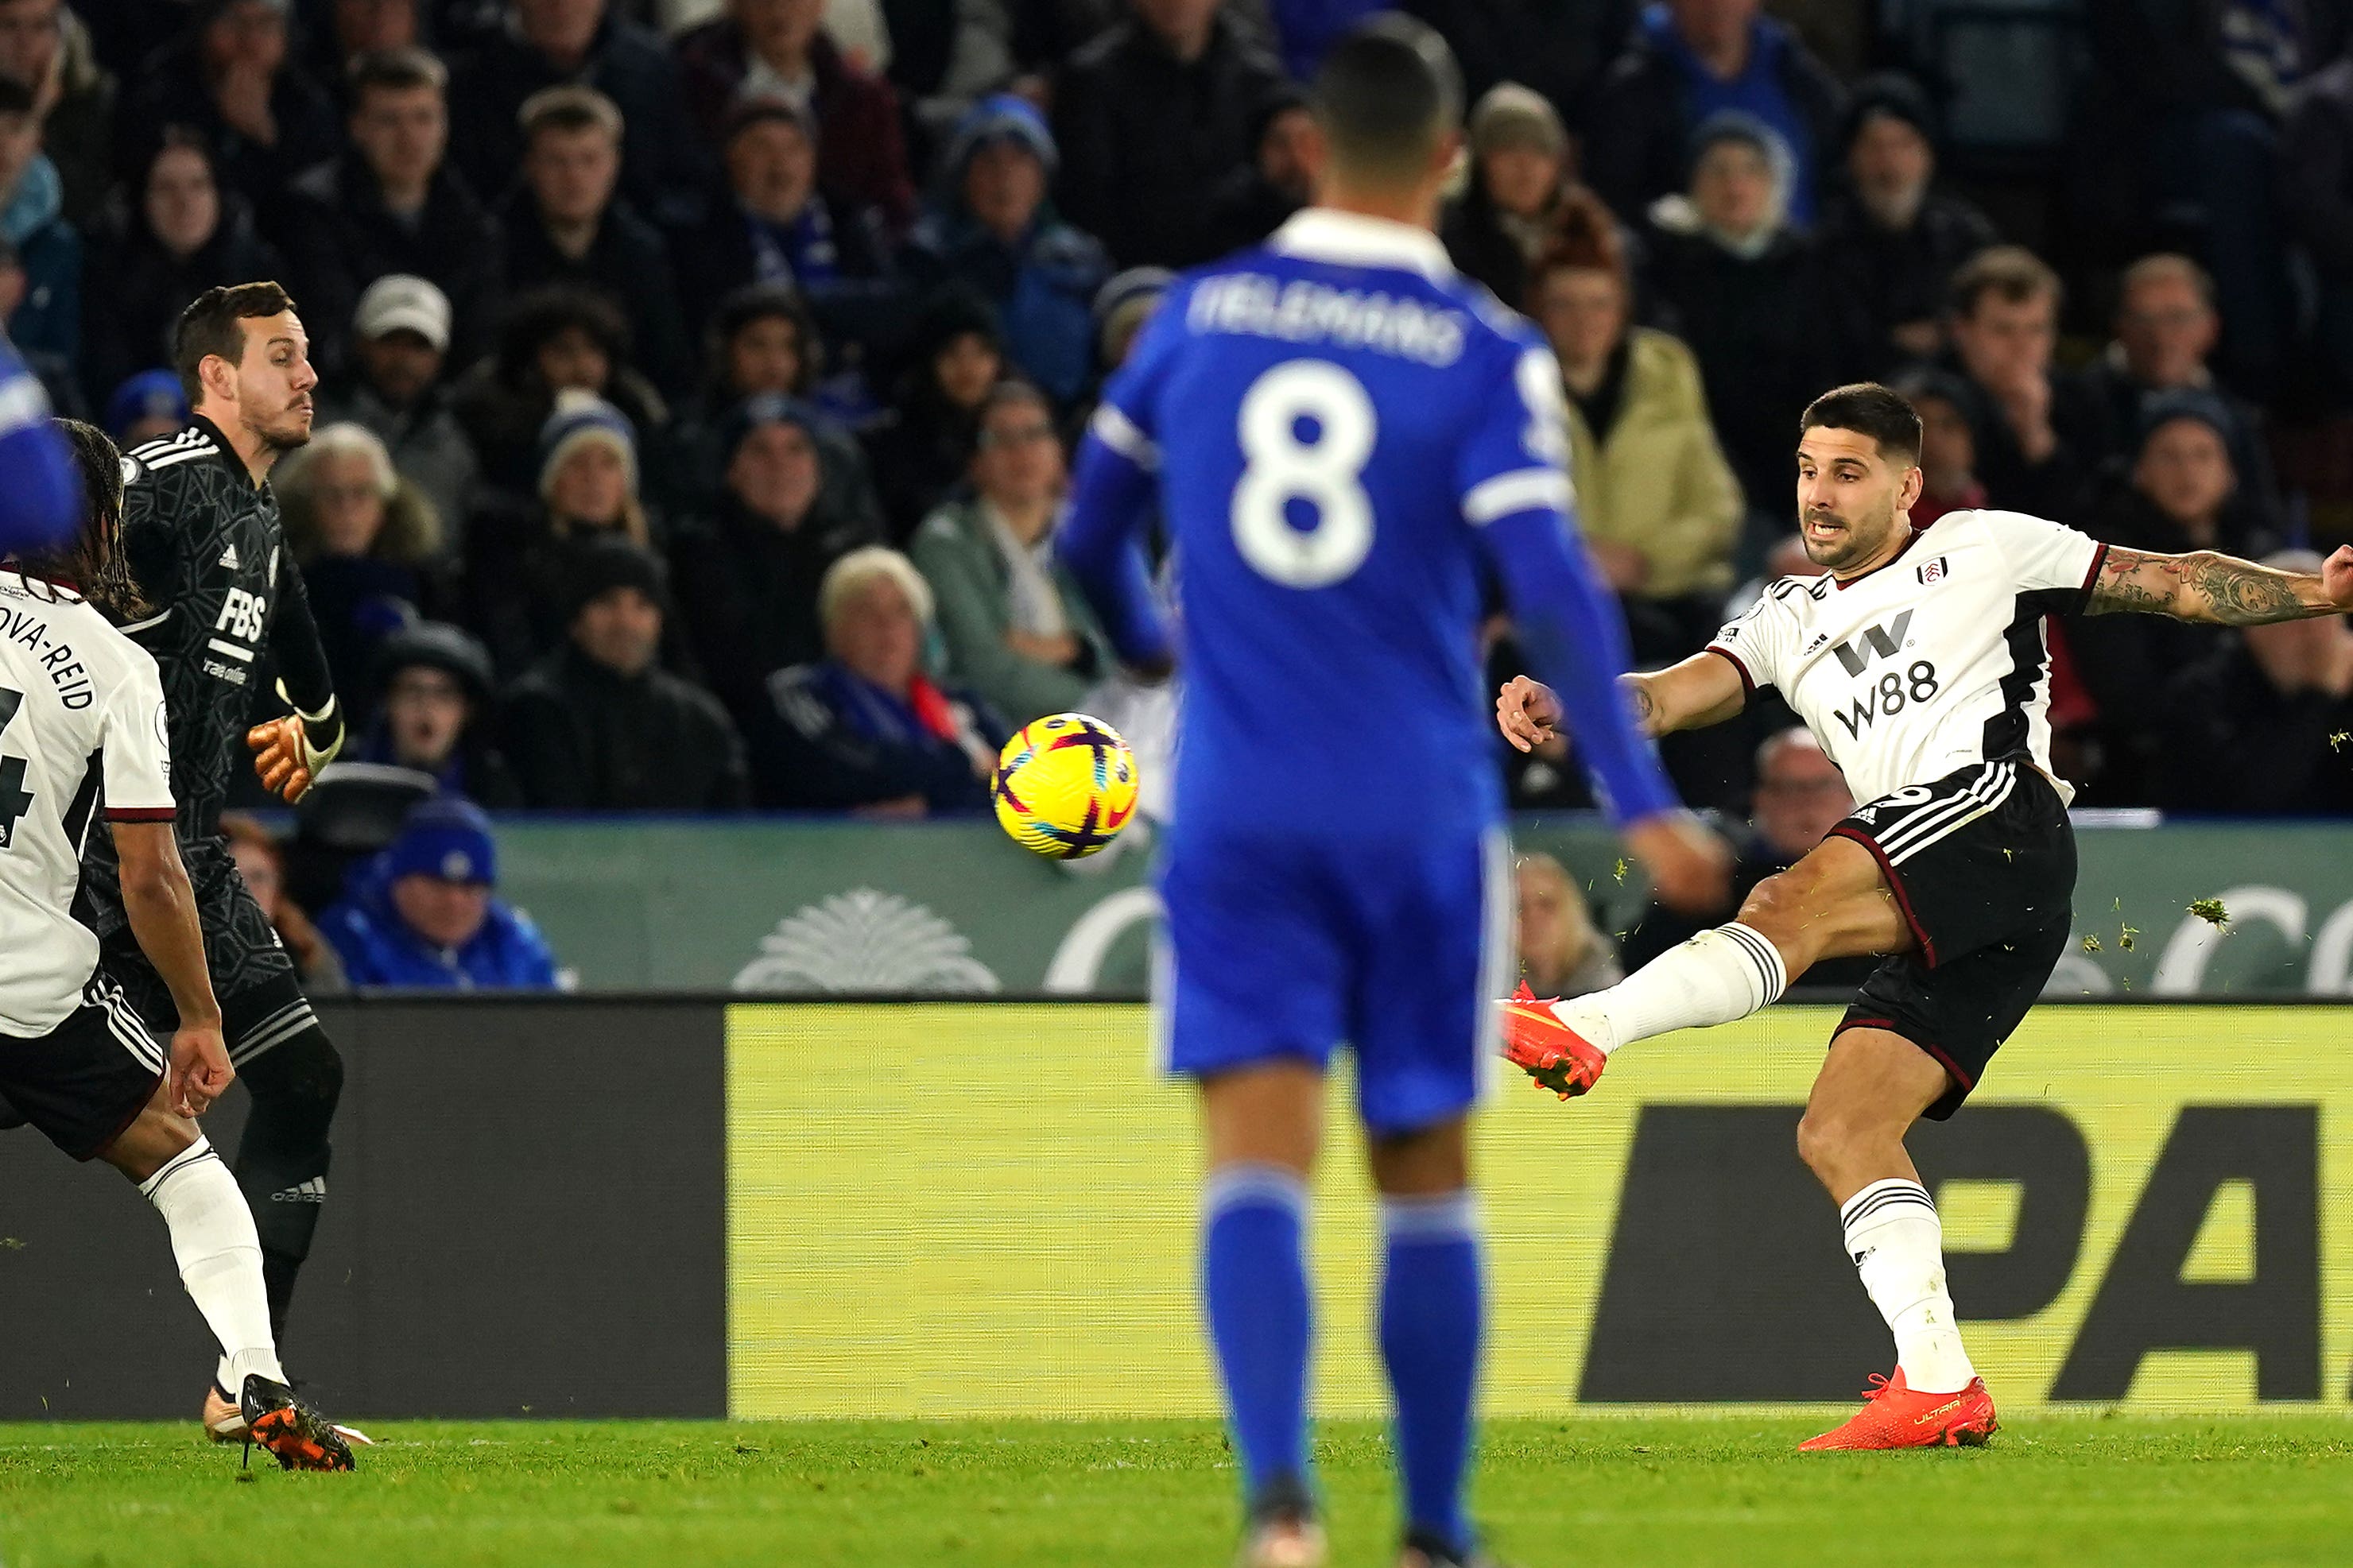 Mitrovic volleyed home the winner against Leicester